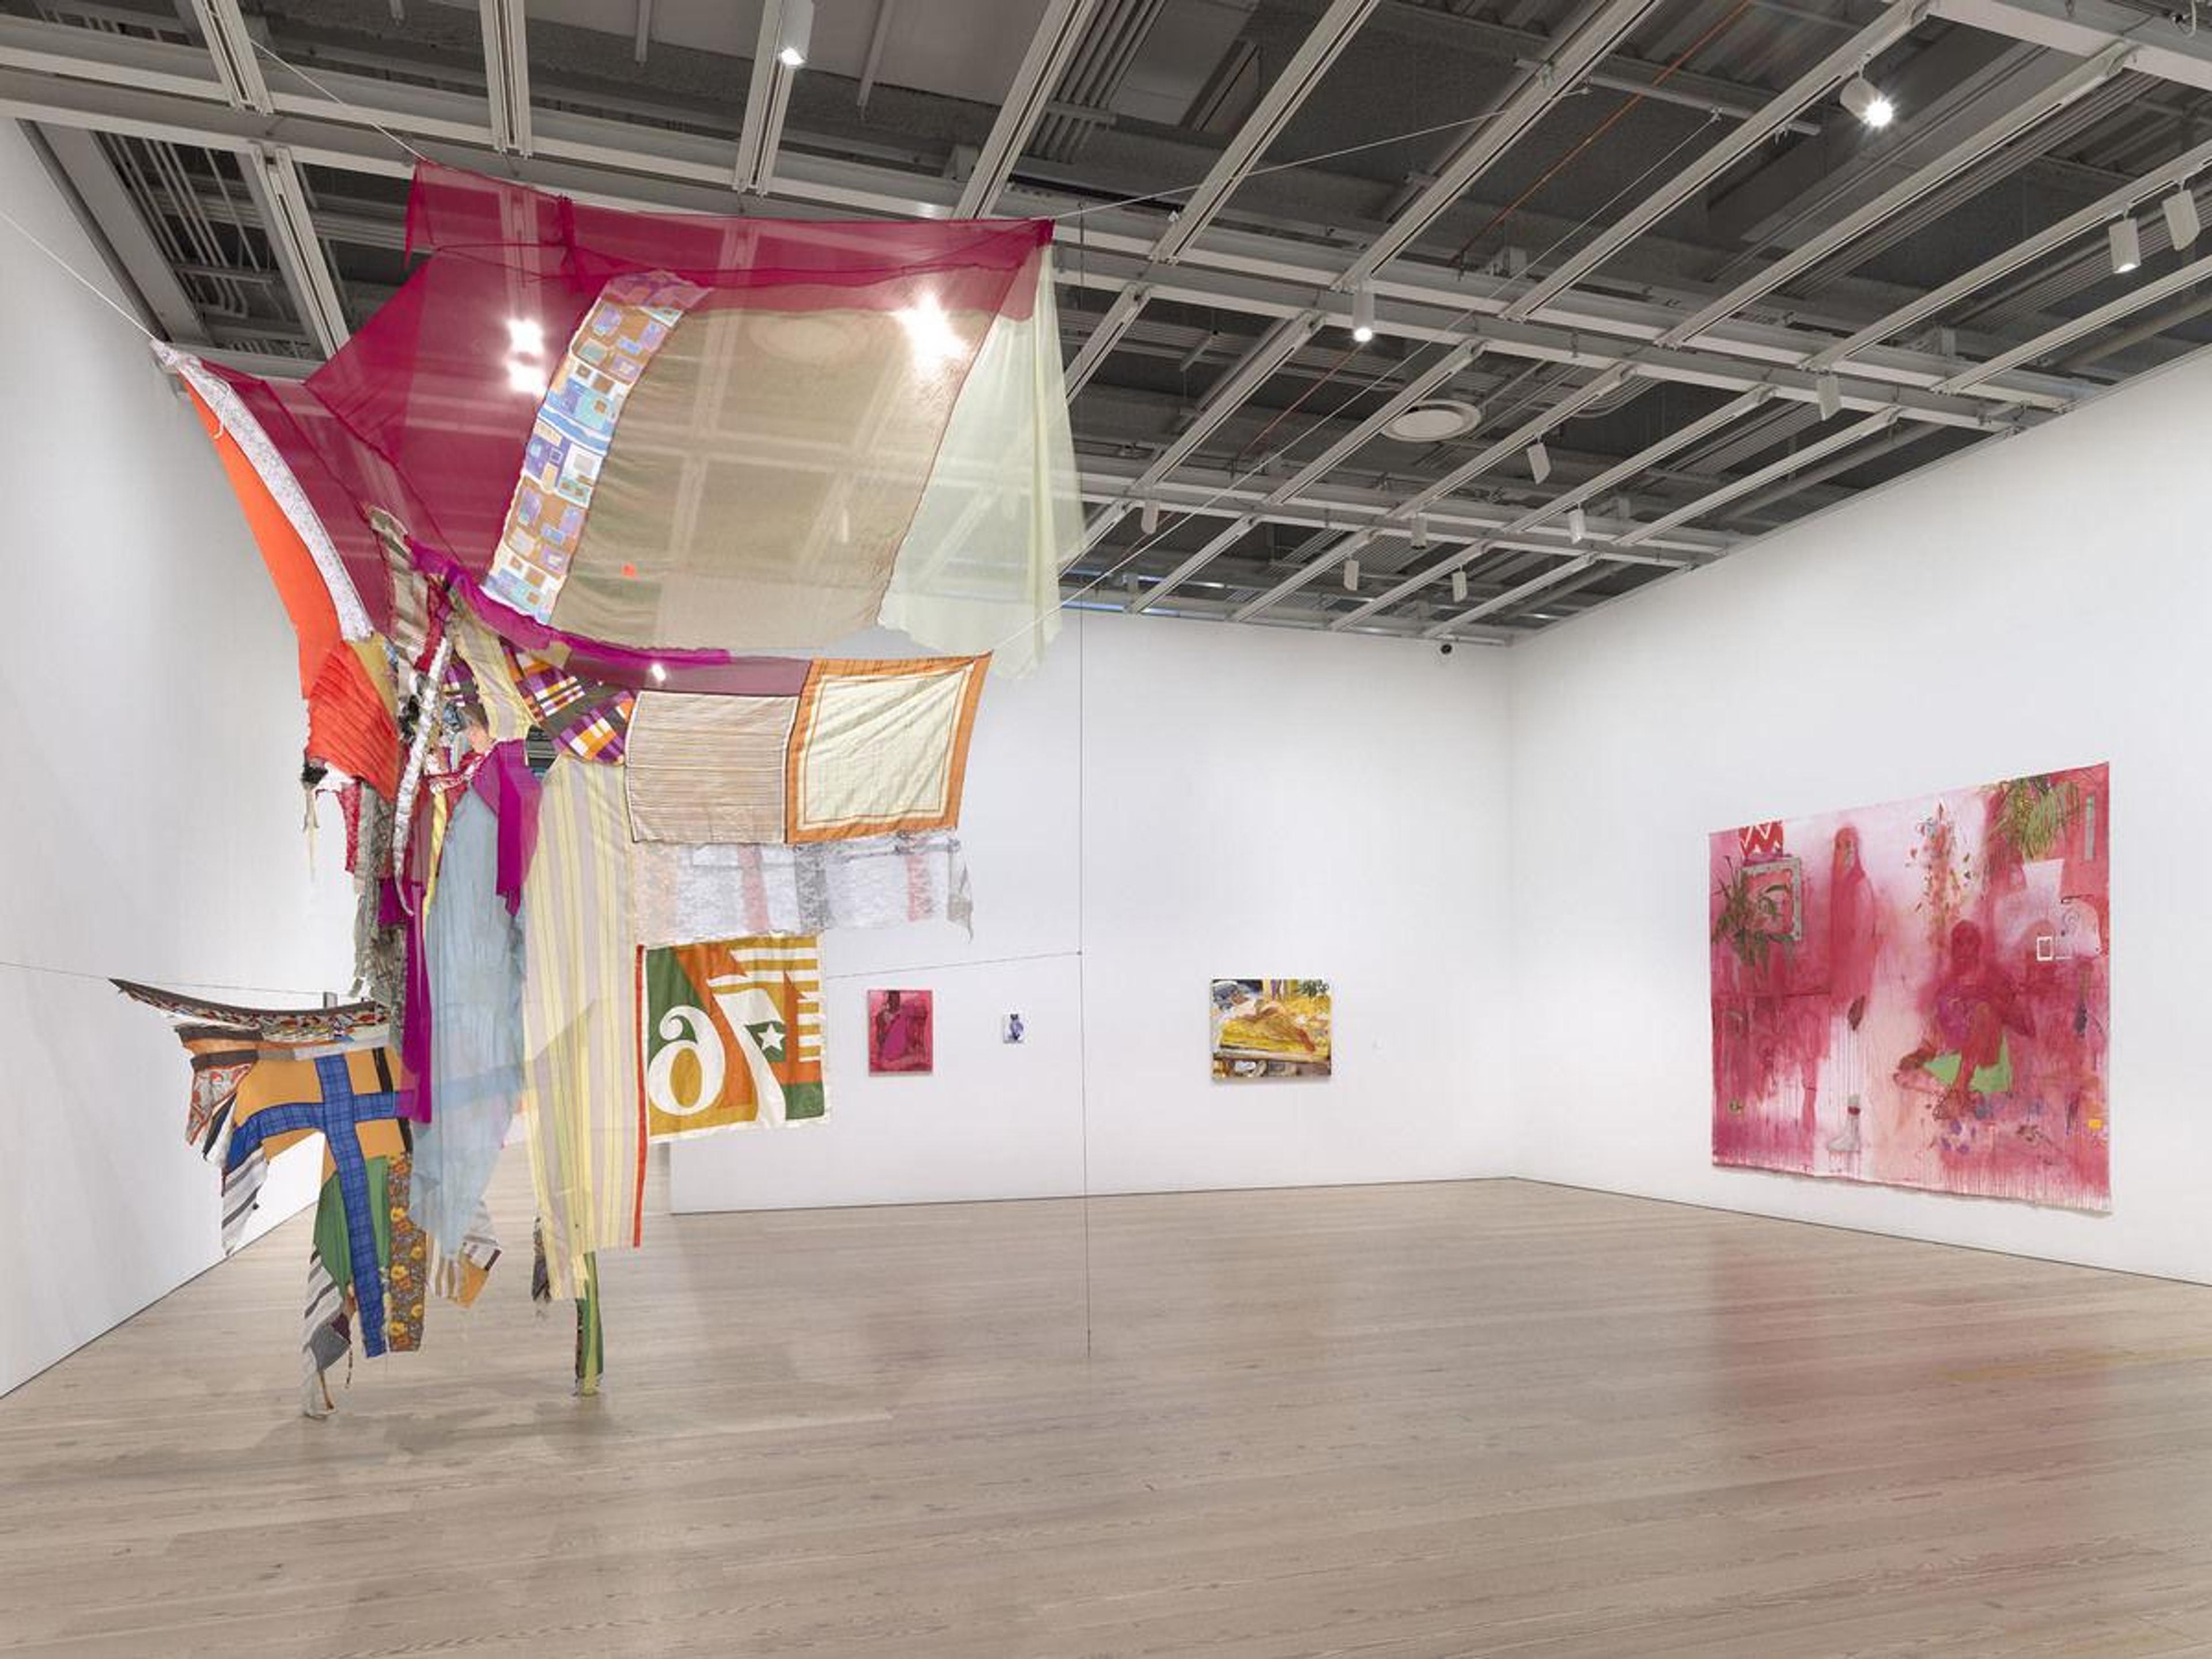 Installation view of the Whitney Biennial 2019 (Whitney Museum of American Art, New York, May 17-September 22, 2019). Photograph by Ron Amstutz